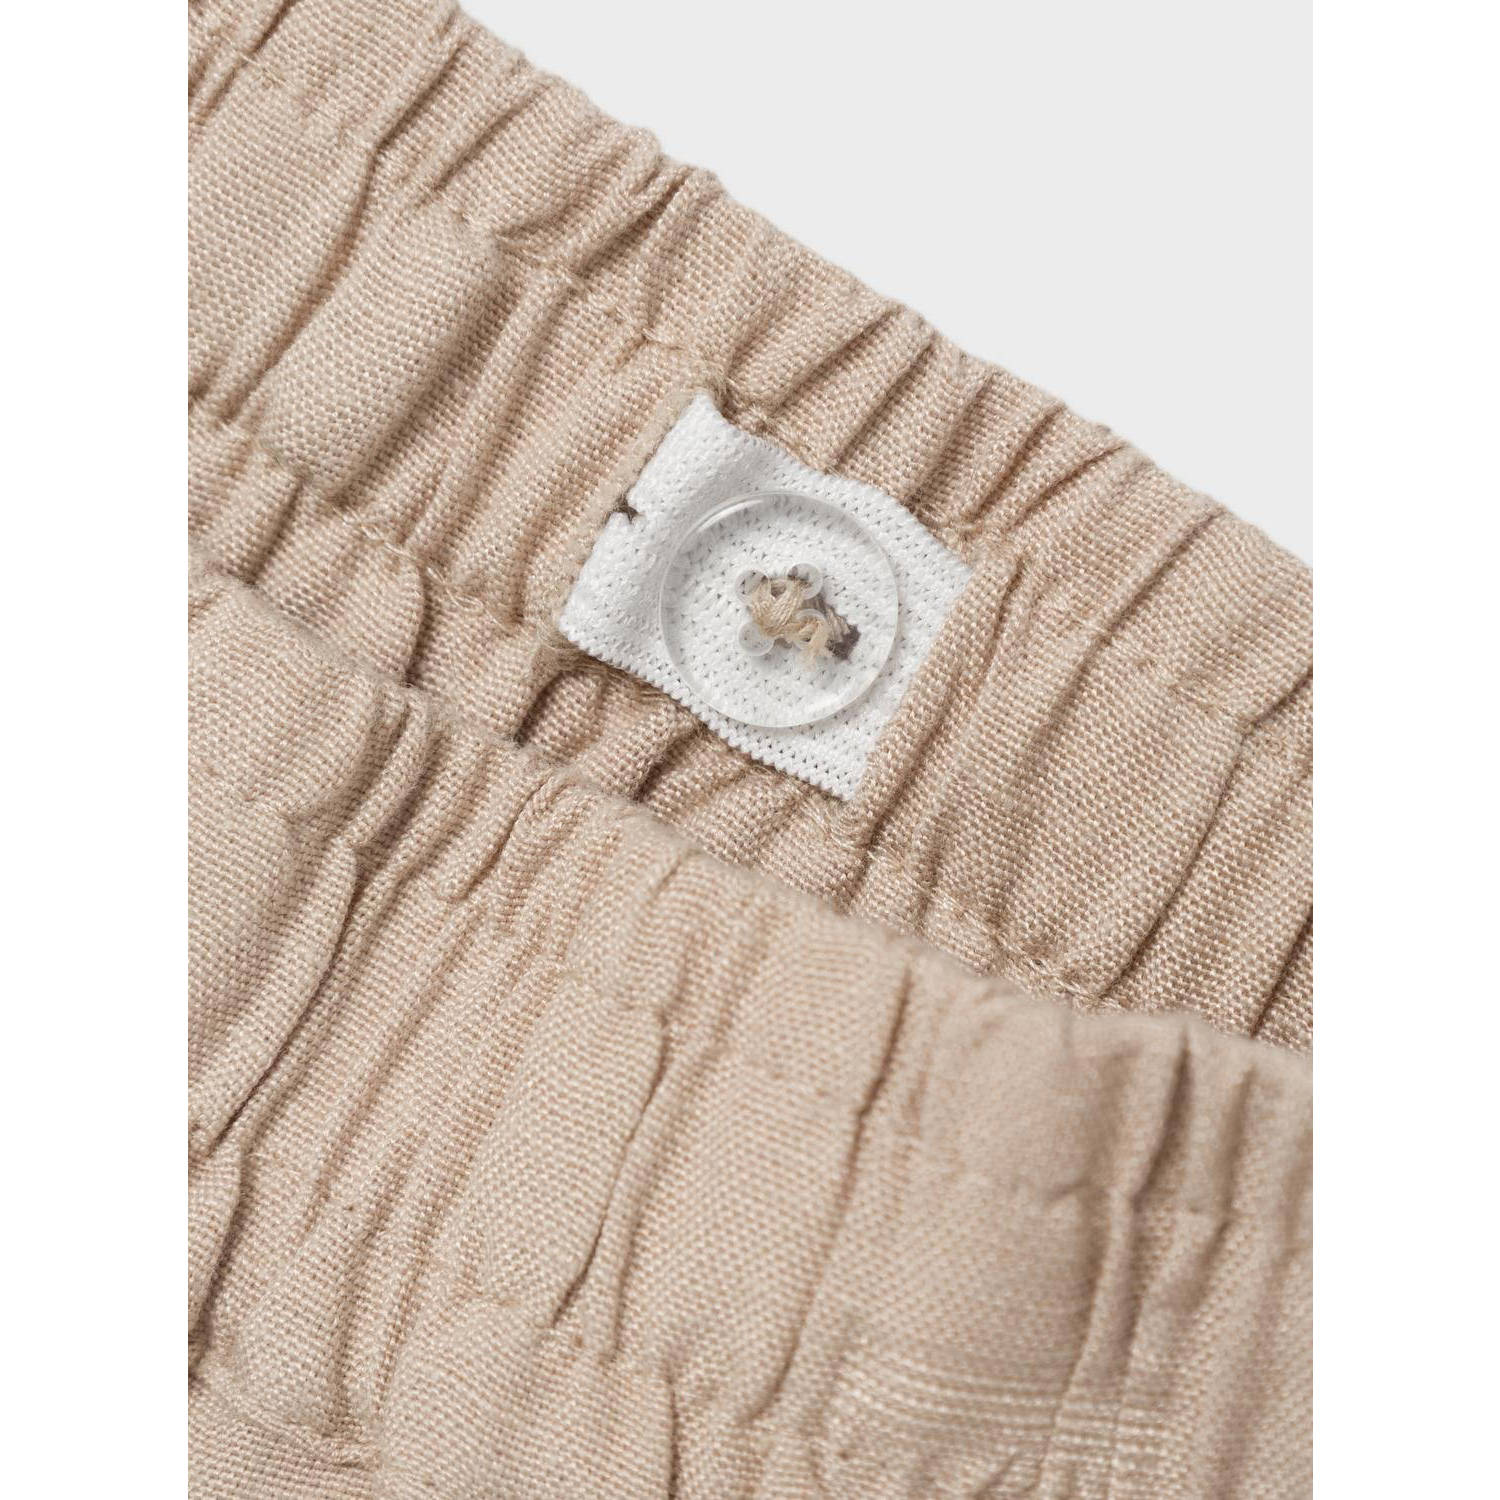 NAME IT KIDS casual short NKMFAHER beige